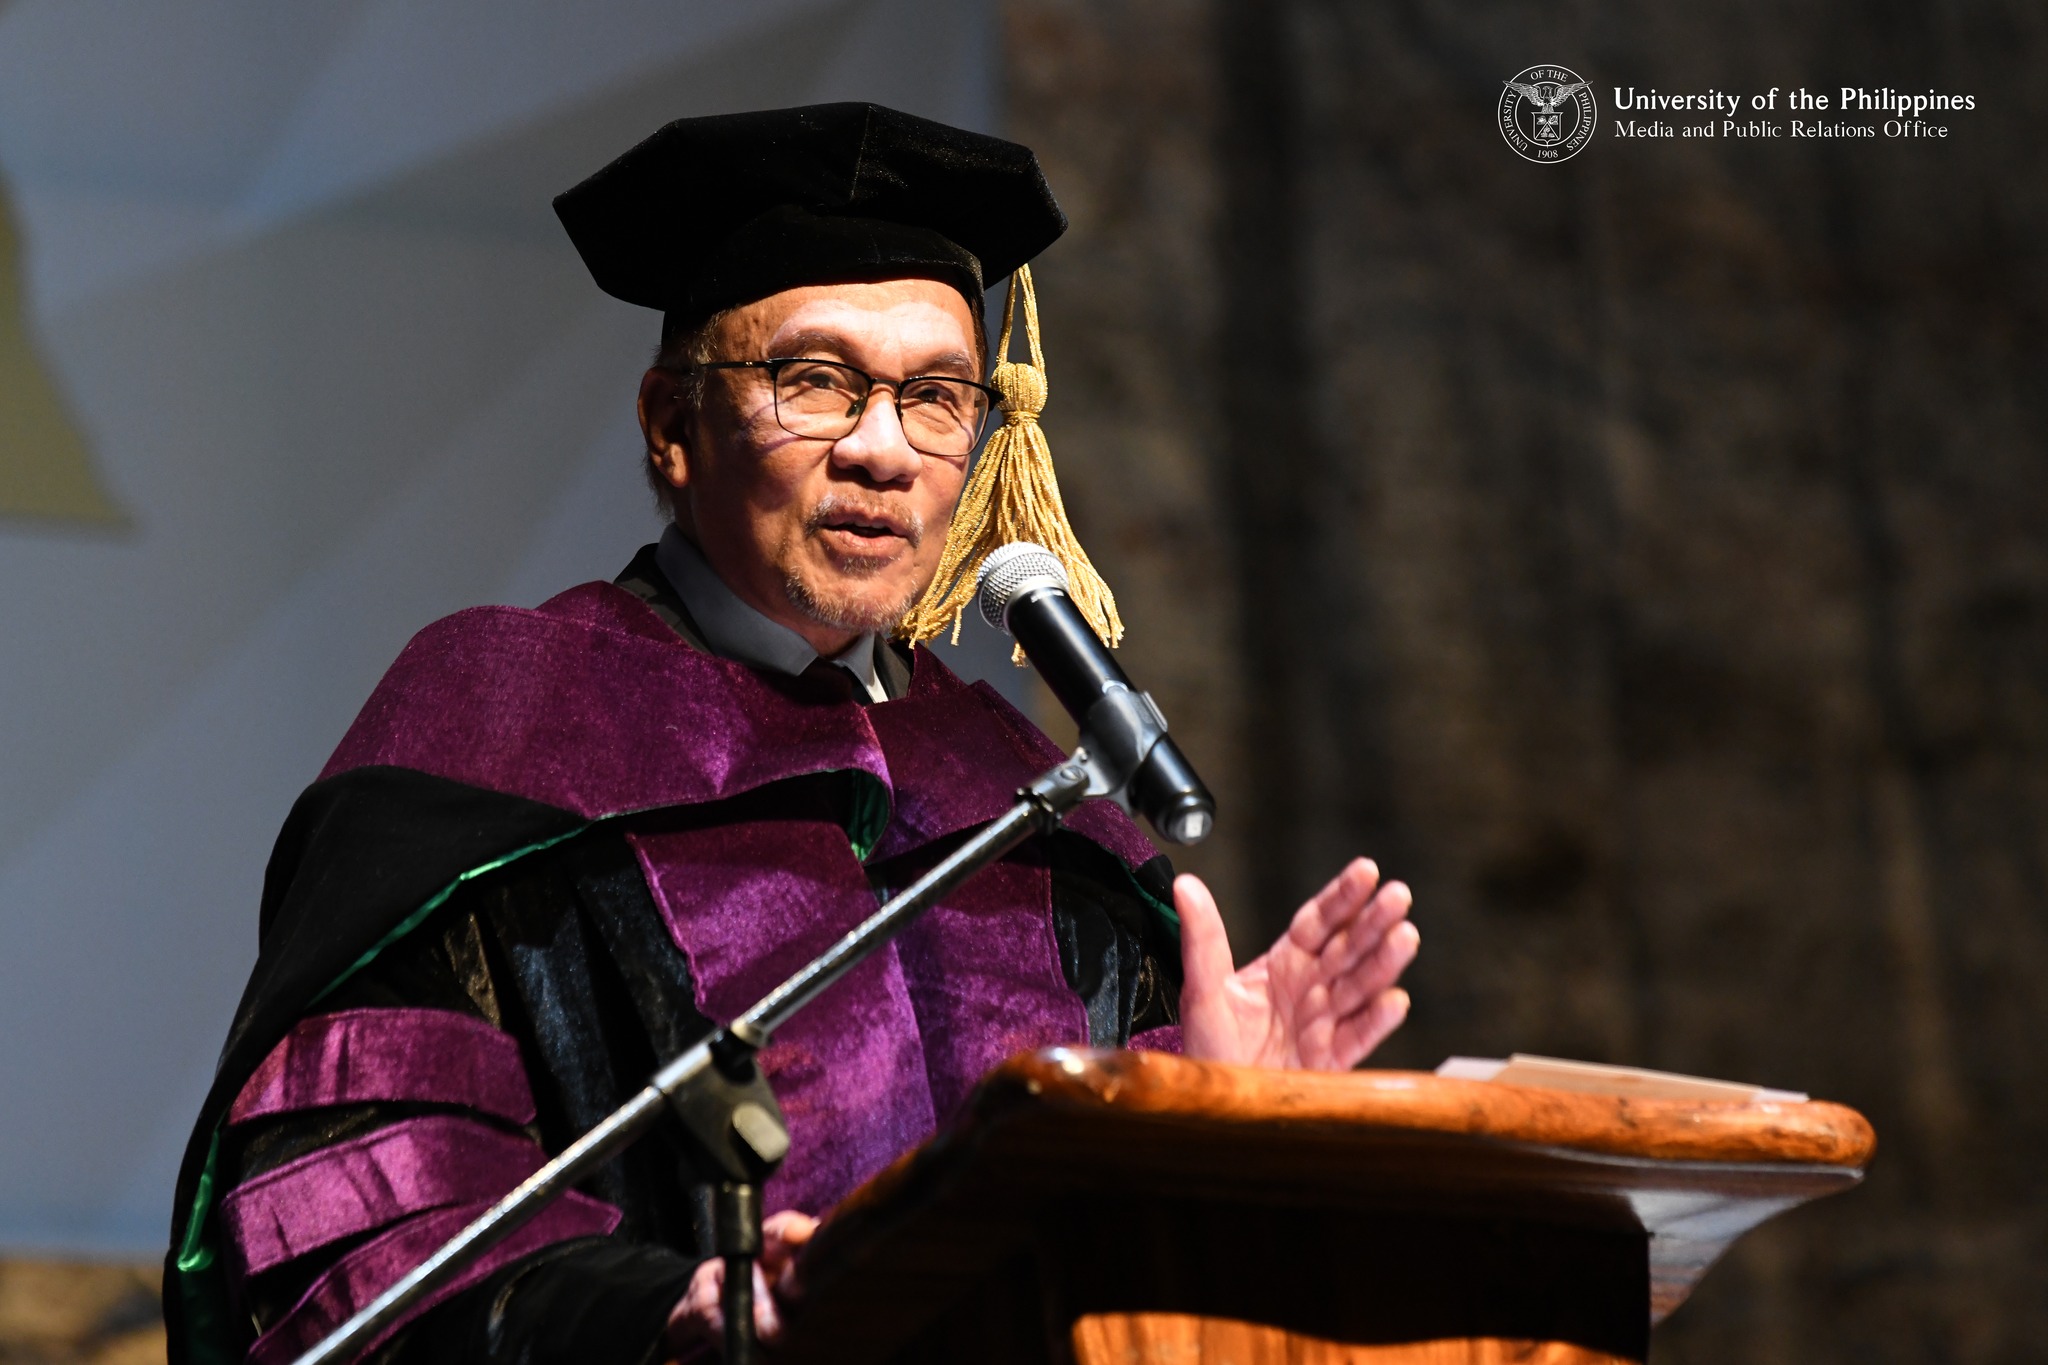 Pm anwar awarded doctorate degree 02